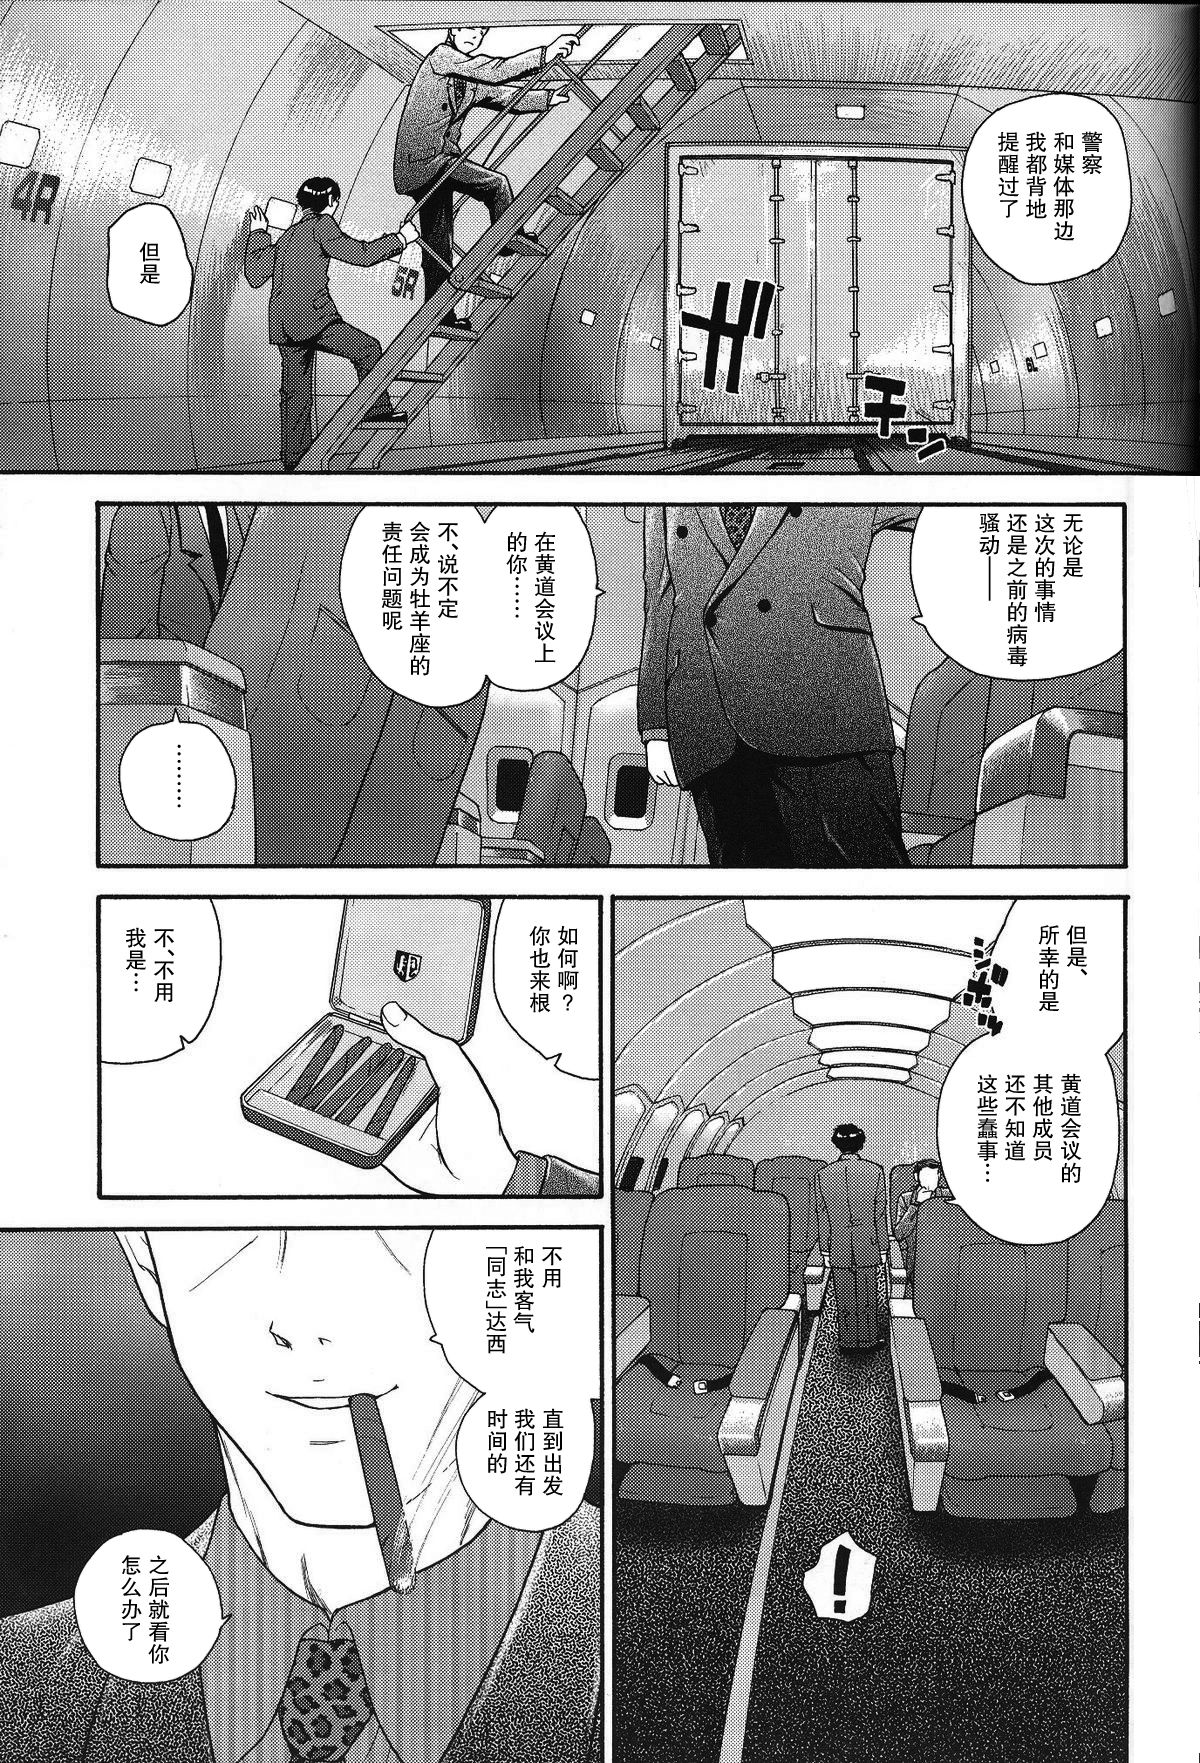 (C71) [Behind Moon (Q)] Dulce Report 8 | 达西报告 8 [Chinese] [哈尼喵汉化组] [Decensored] page 6 full